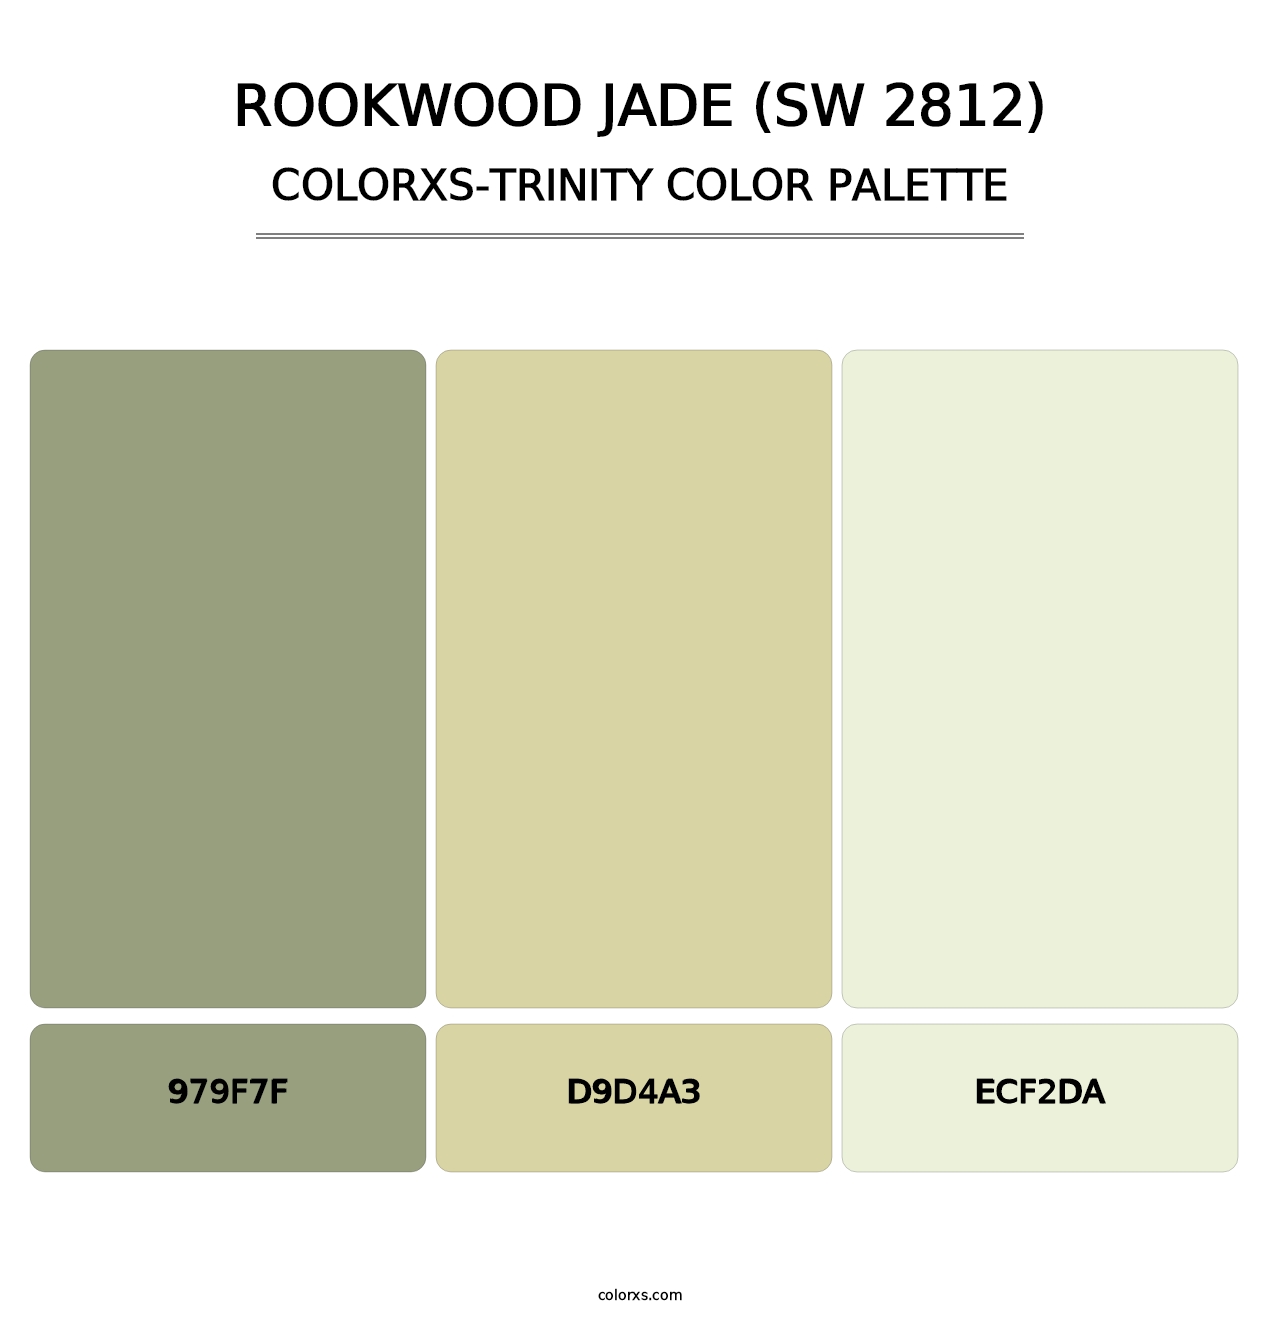 Rookwood Jade (SW 2812) - Colorxs Trinity Palette